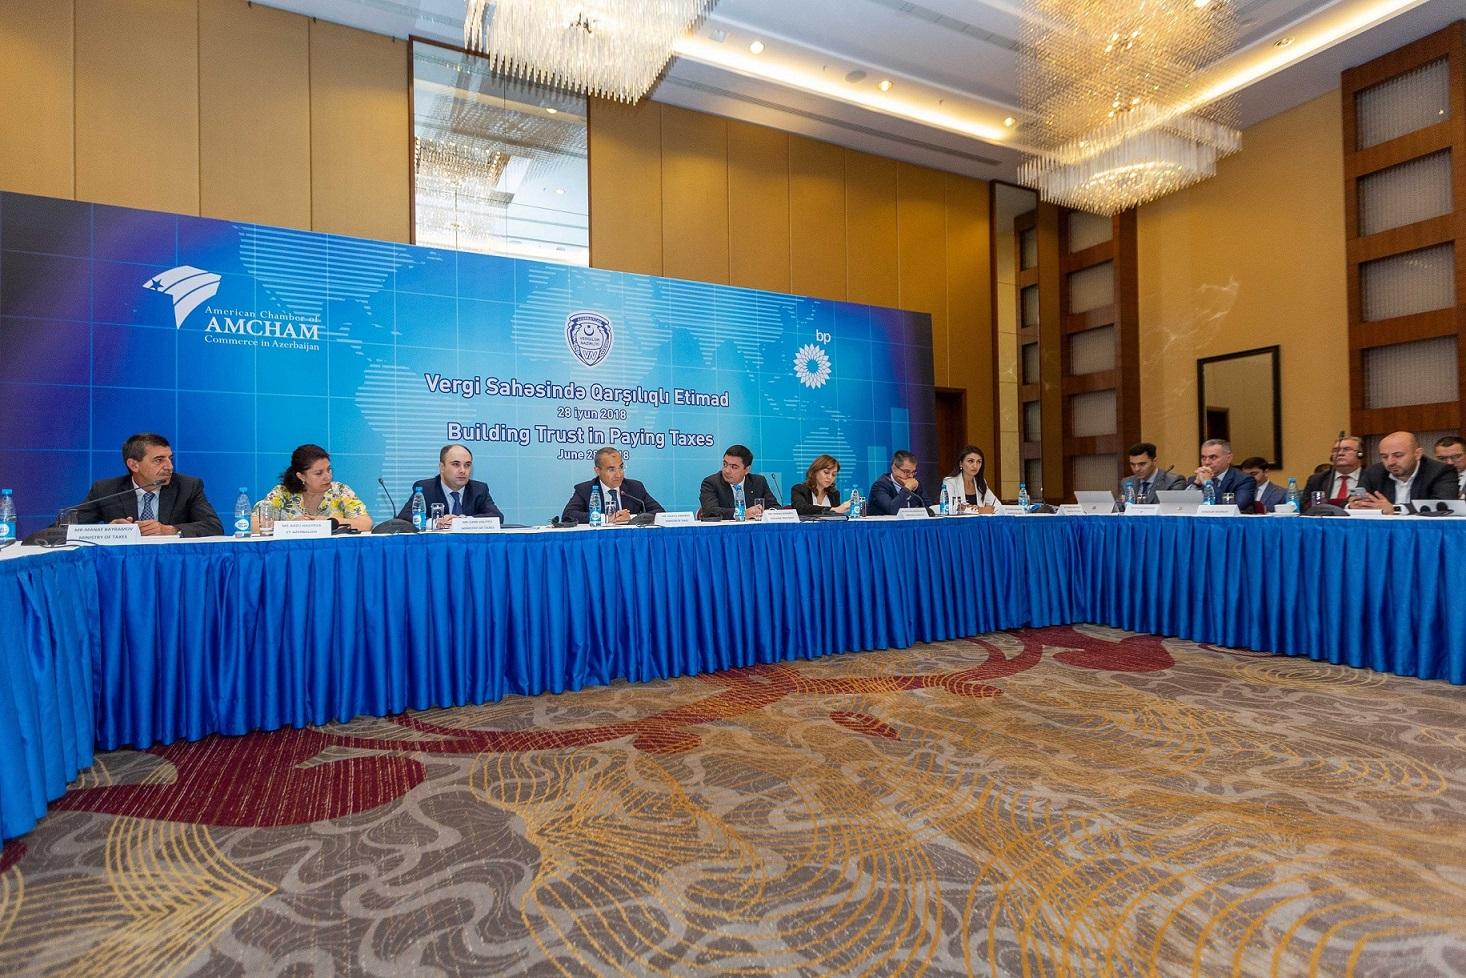 Roundtable Discussion on "Building Trust in Paying Taxes" organized in Baku (PHOTO)